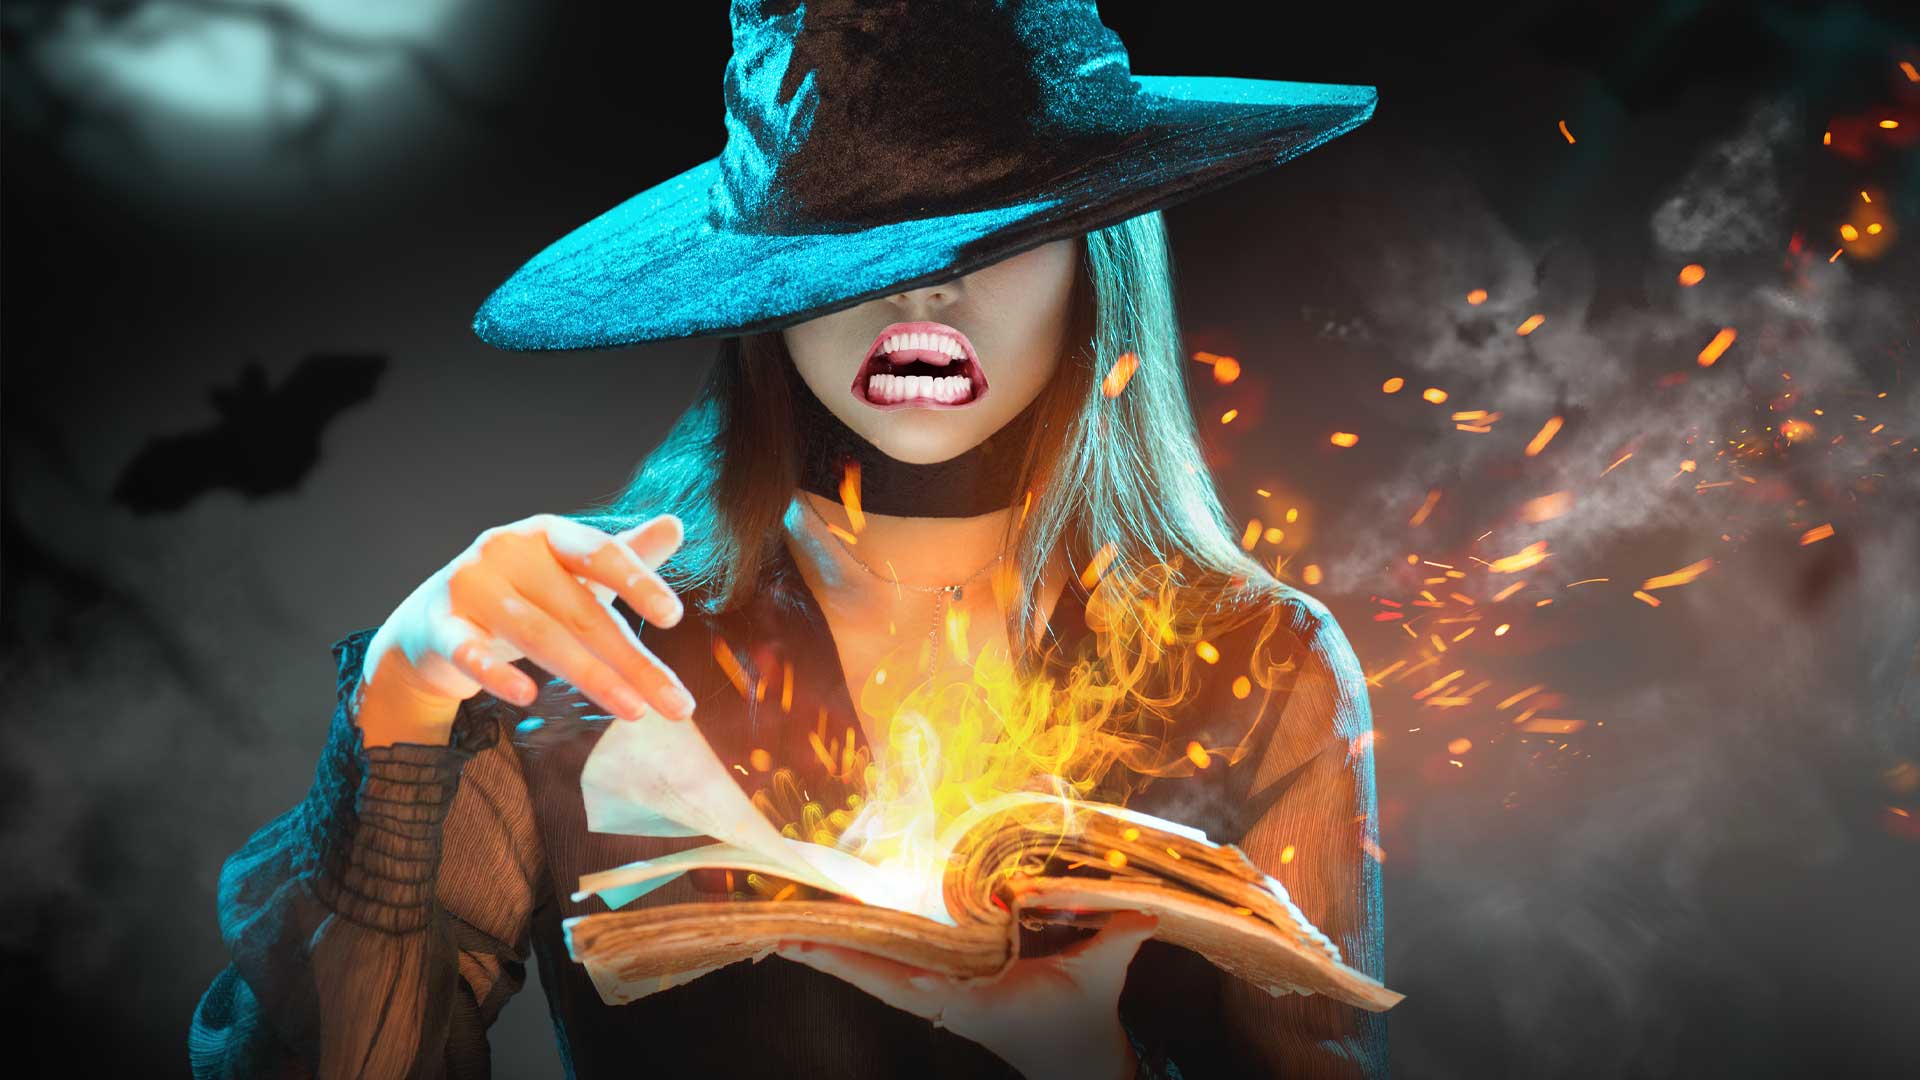 A witch looking at a burning spell book